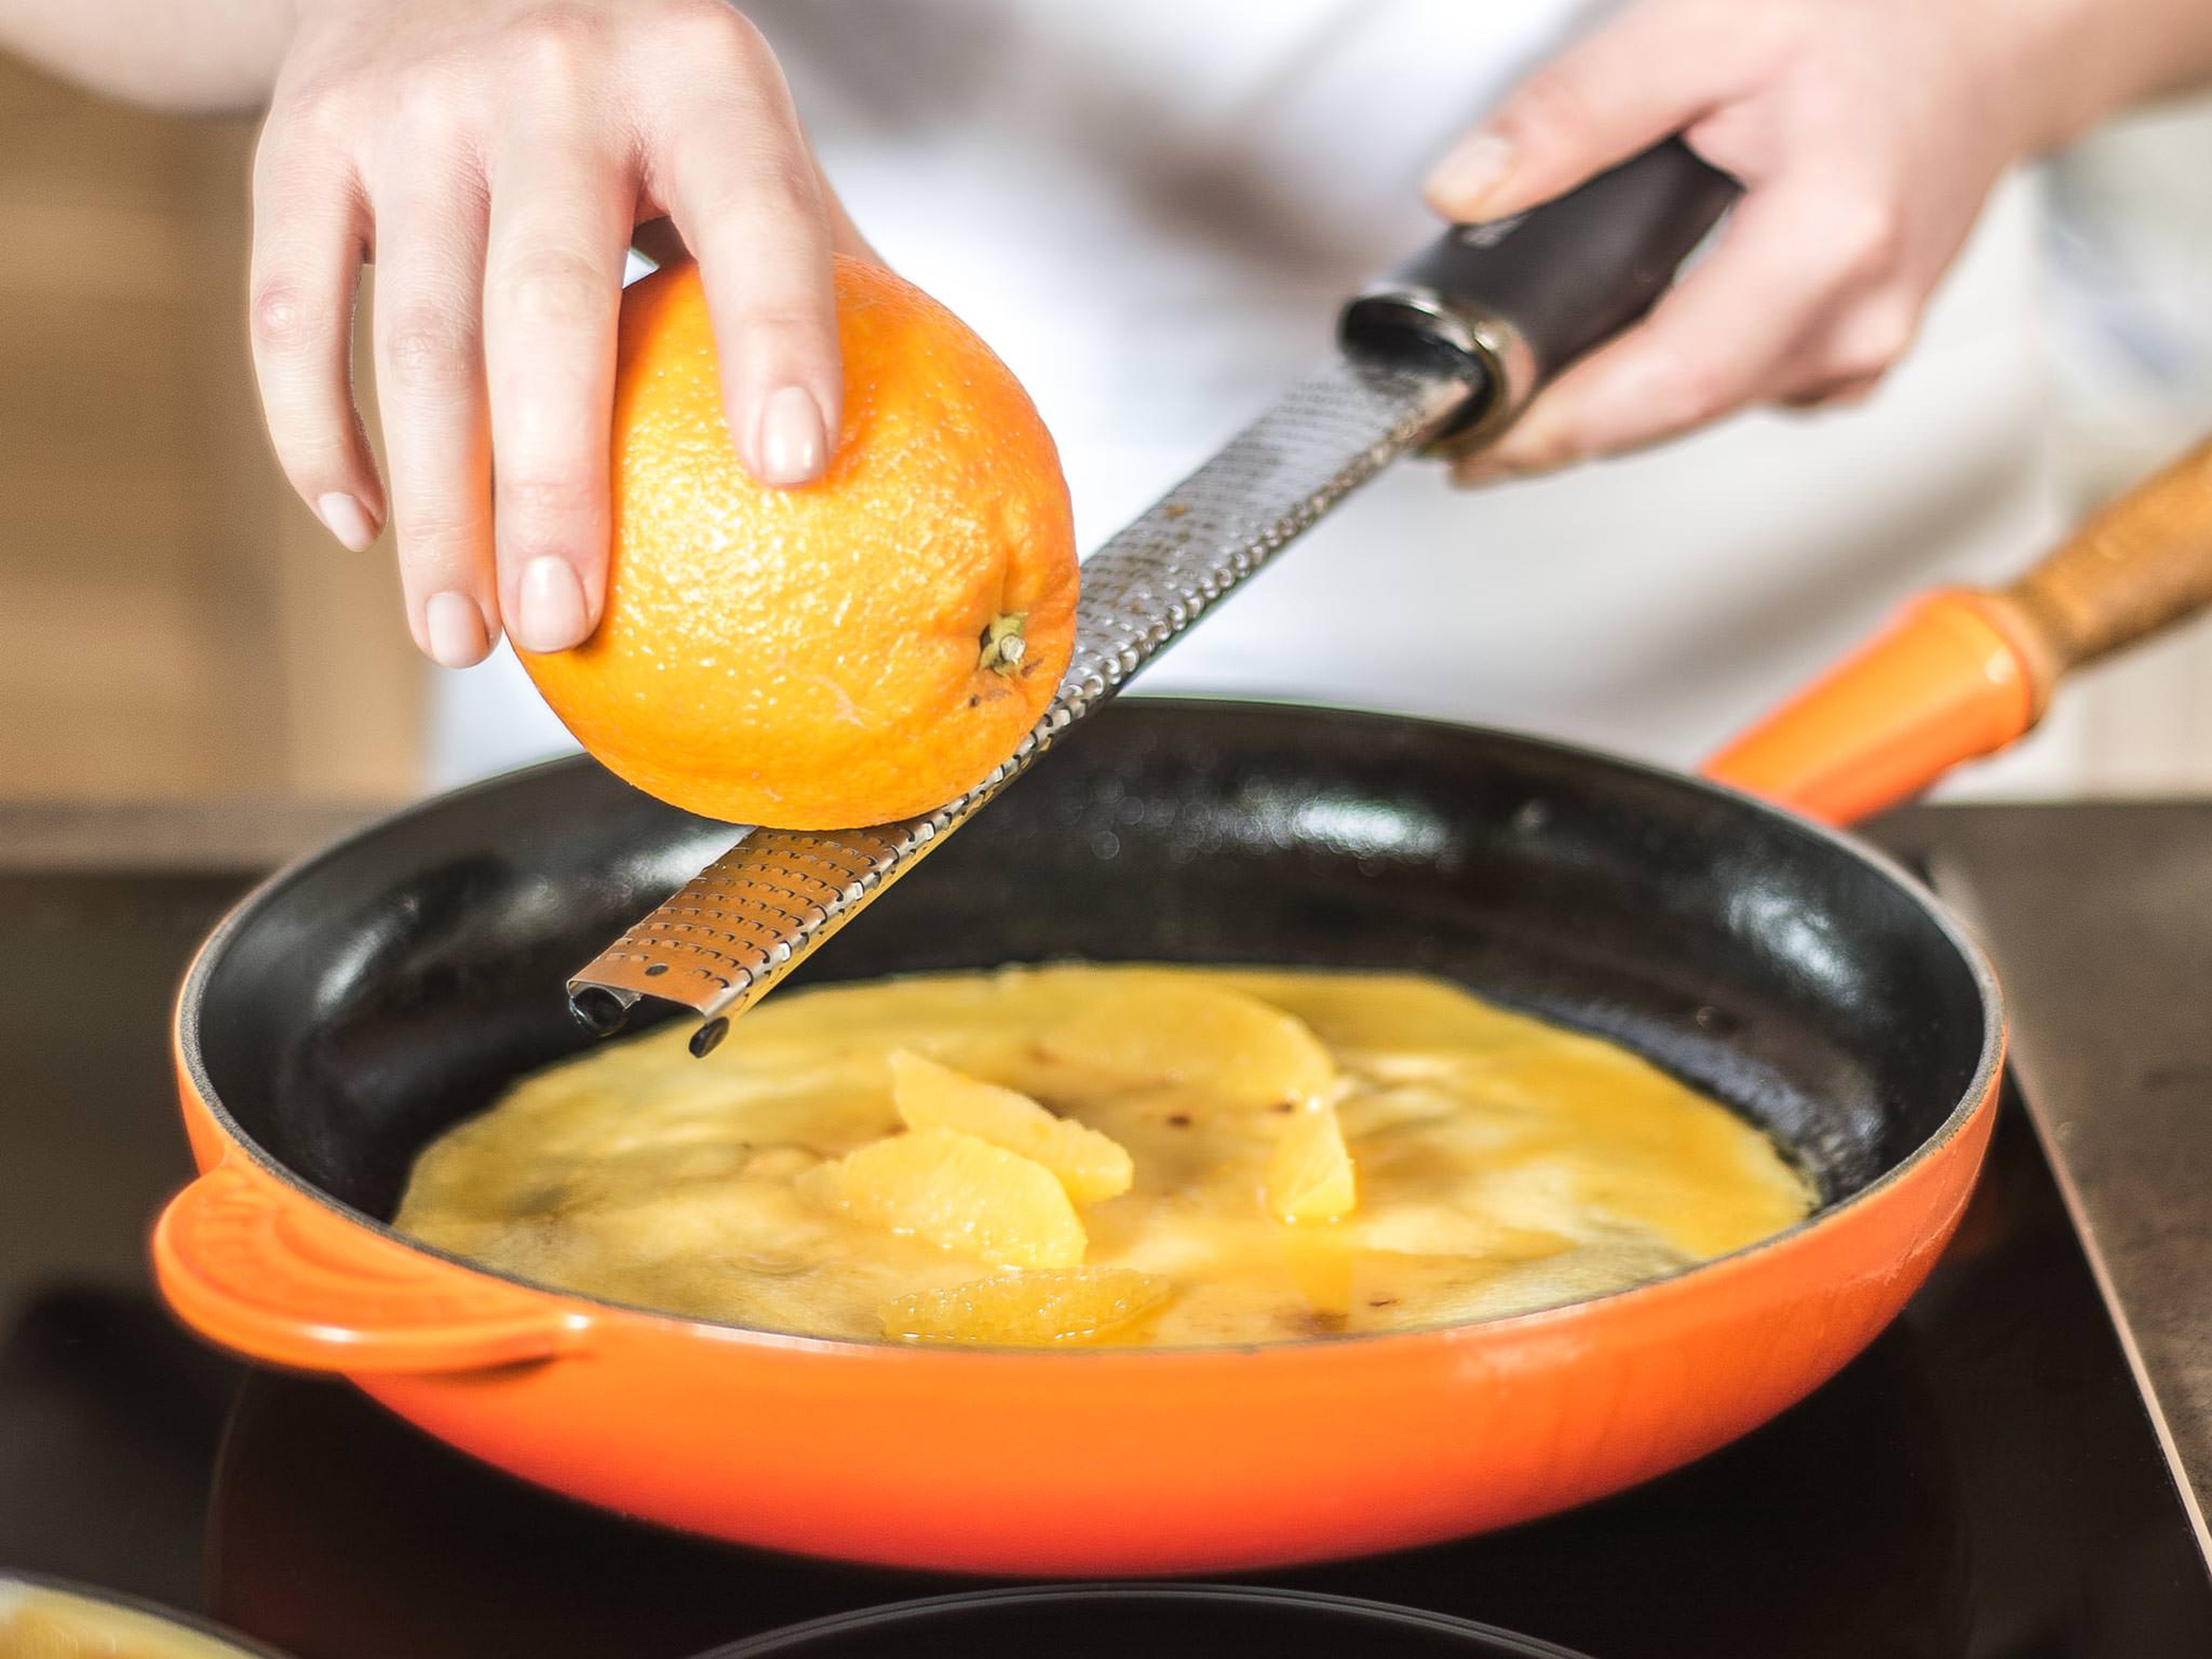 Warm the cooked Crêpe in the orange sauce. Add the orange segments and orange zest. Fold if desired and serve warm.